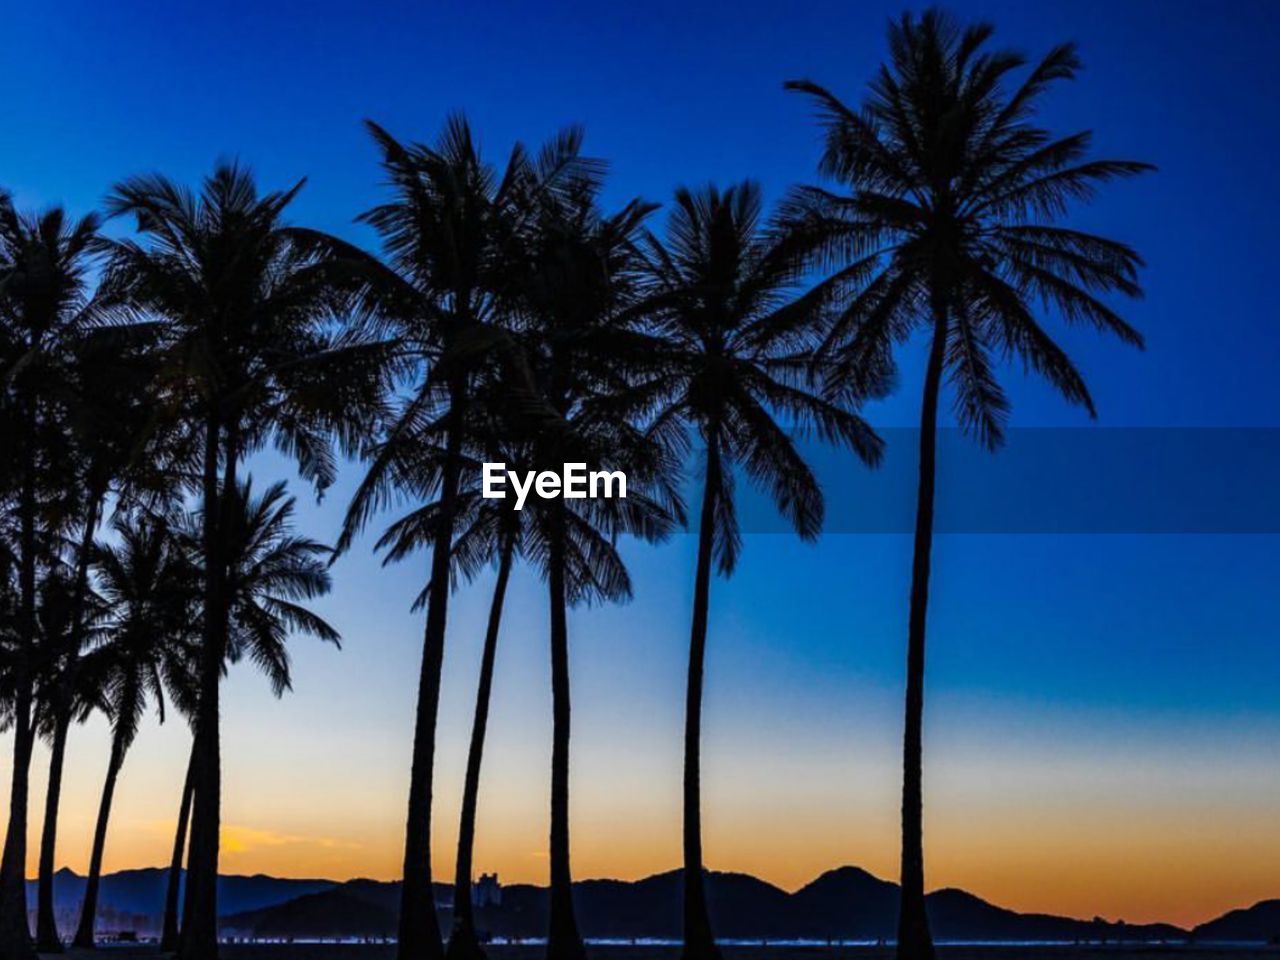 Palm trees against sky during sunset